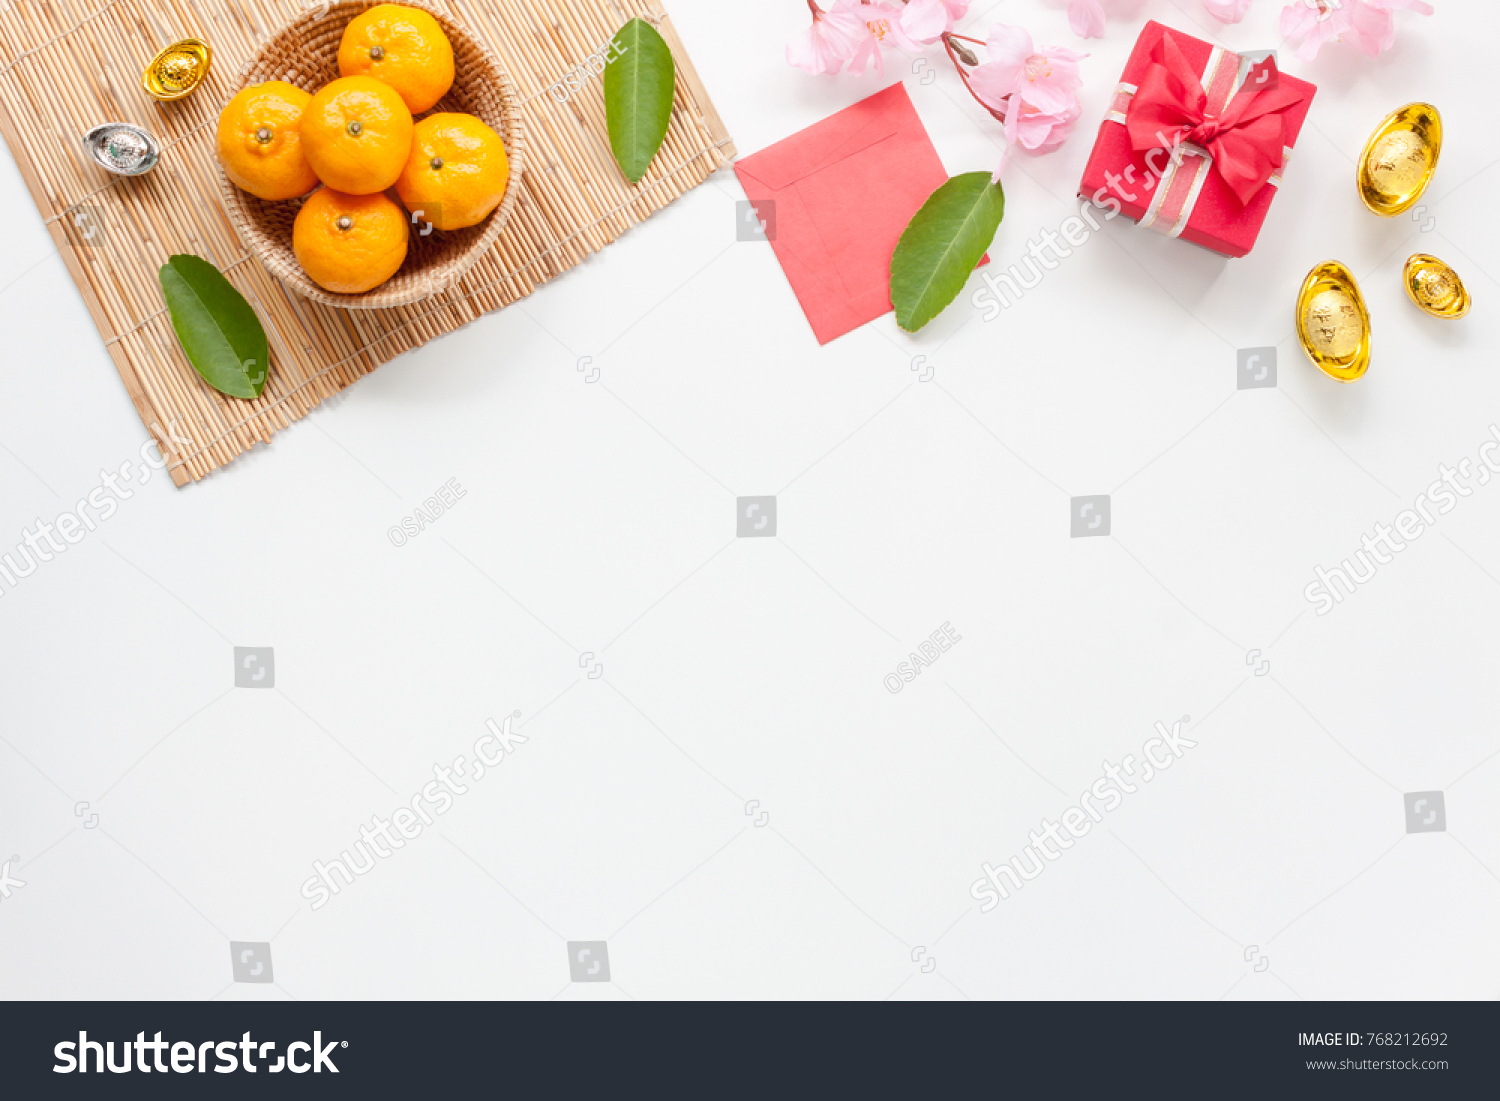 Flat lay of accessories Chinese new year and decorations Lunar new year festival concept background.Difference items on modern white wooden at office.Other language mean rich or wealthy and happy. #768212692